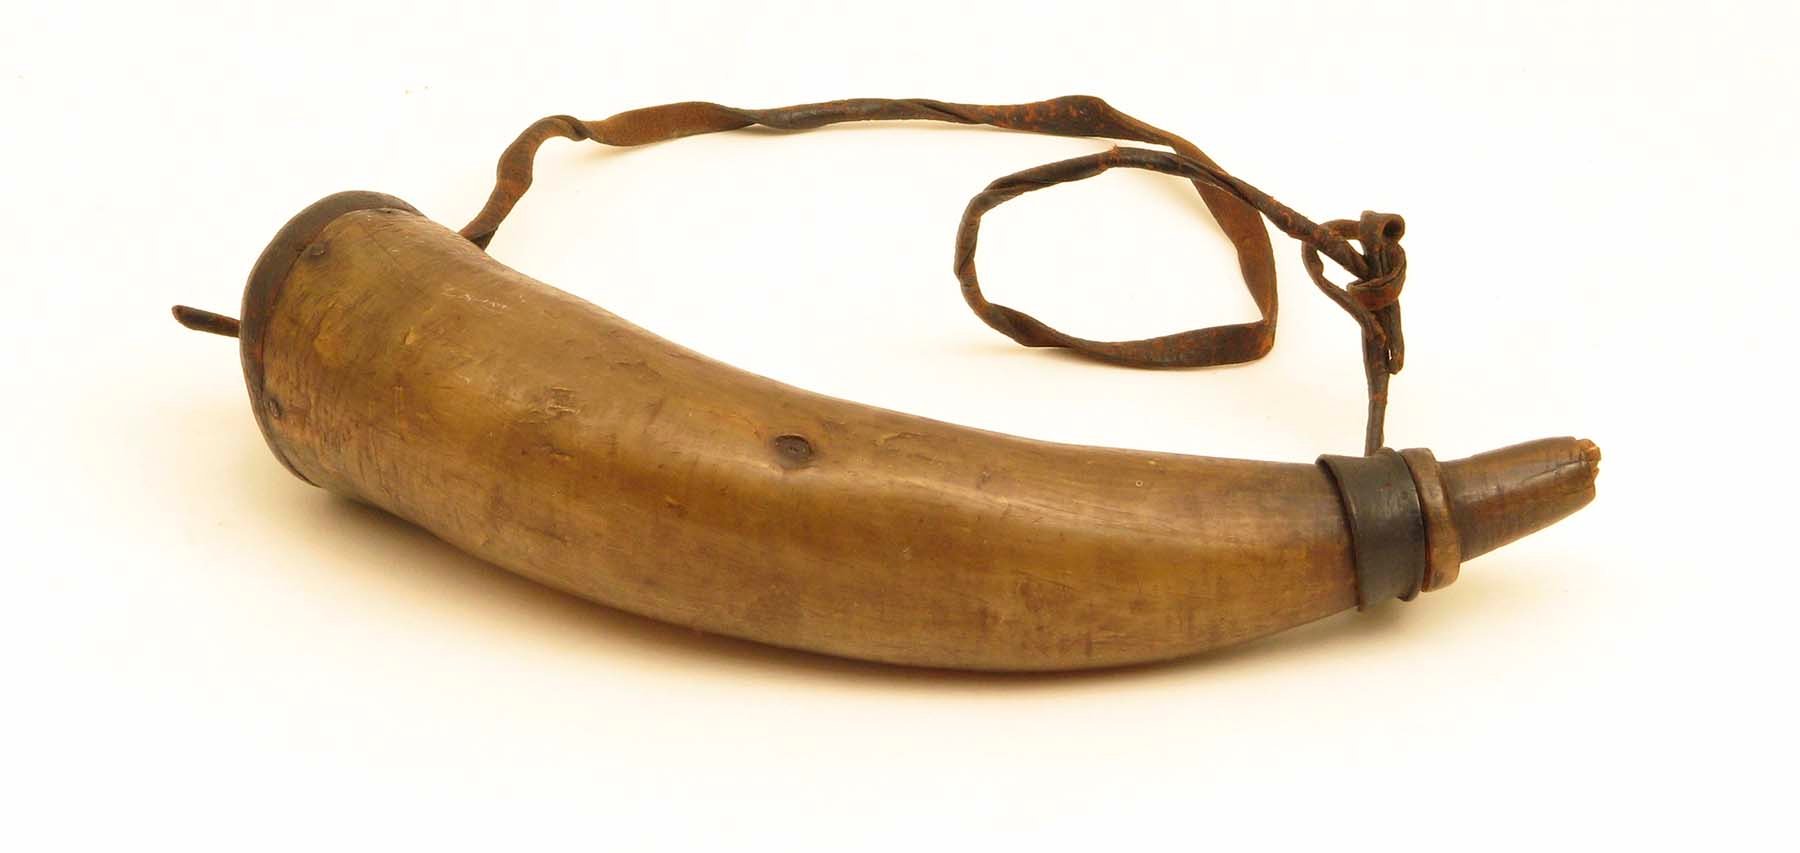 Powder horn, ca. 1840. Chahiksichahiks (Pawnee). The Paul Dyck Plains Indian Buffalo Culture Collection, acquired through the generosity of the Dyck family and additional gifts of the Nielson Family and the Estate of Margaret S. Coe. NA.108.153